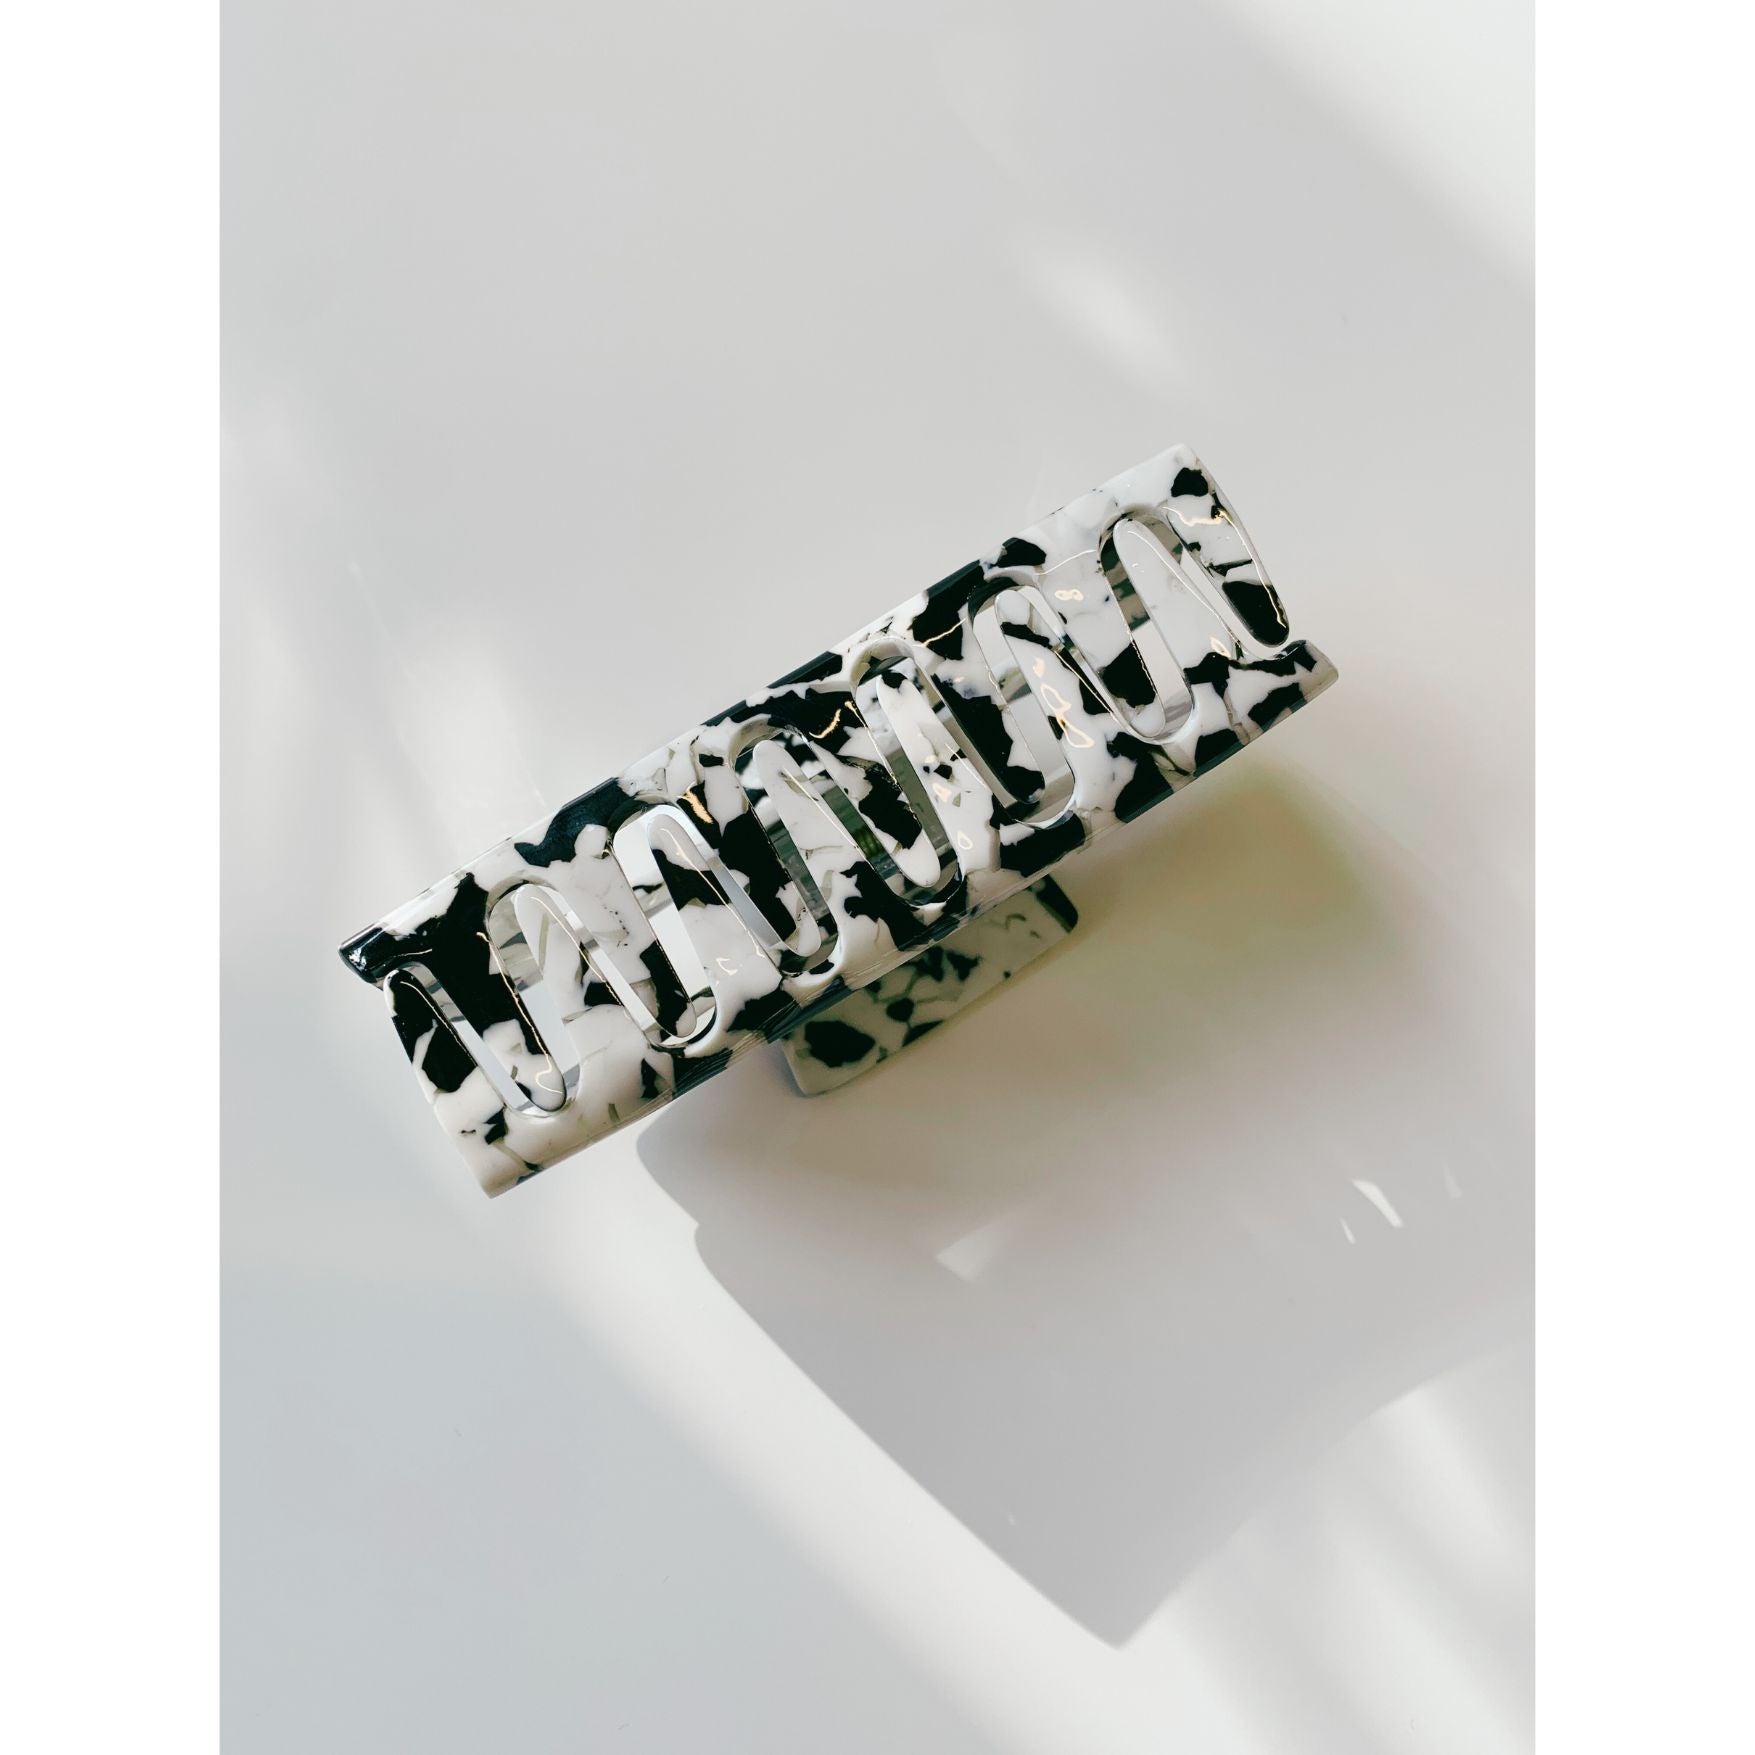 Velvet Claws Hair Clip | The Diana in Black and White Marble | Claw Clip in Velvet Travel Bag